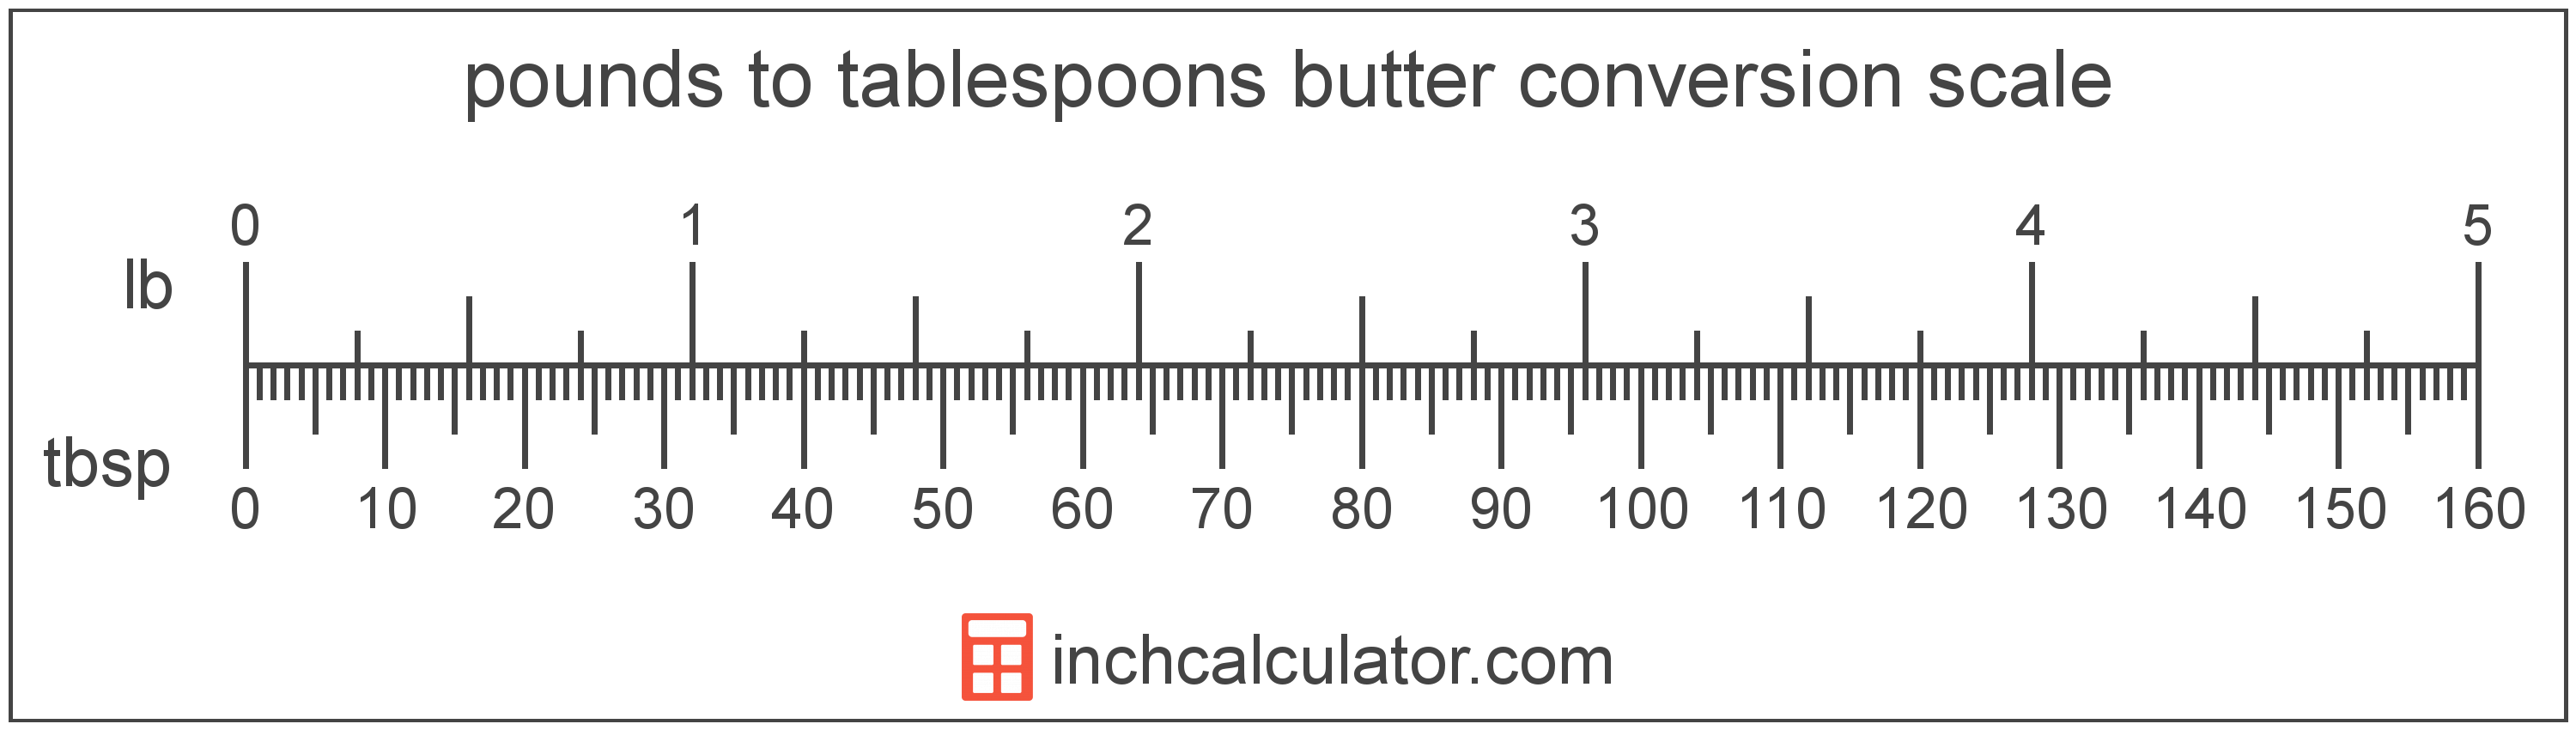 conversion scale showing tablespoons and equivalent pounds butter values